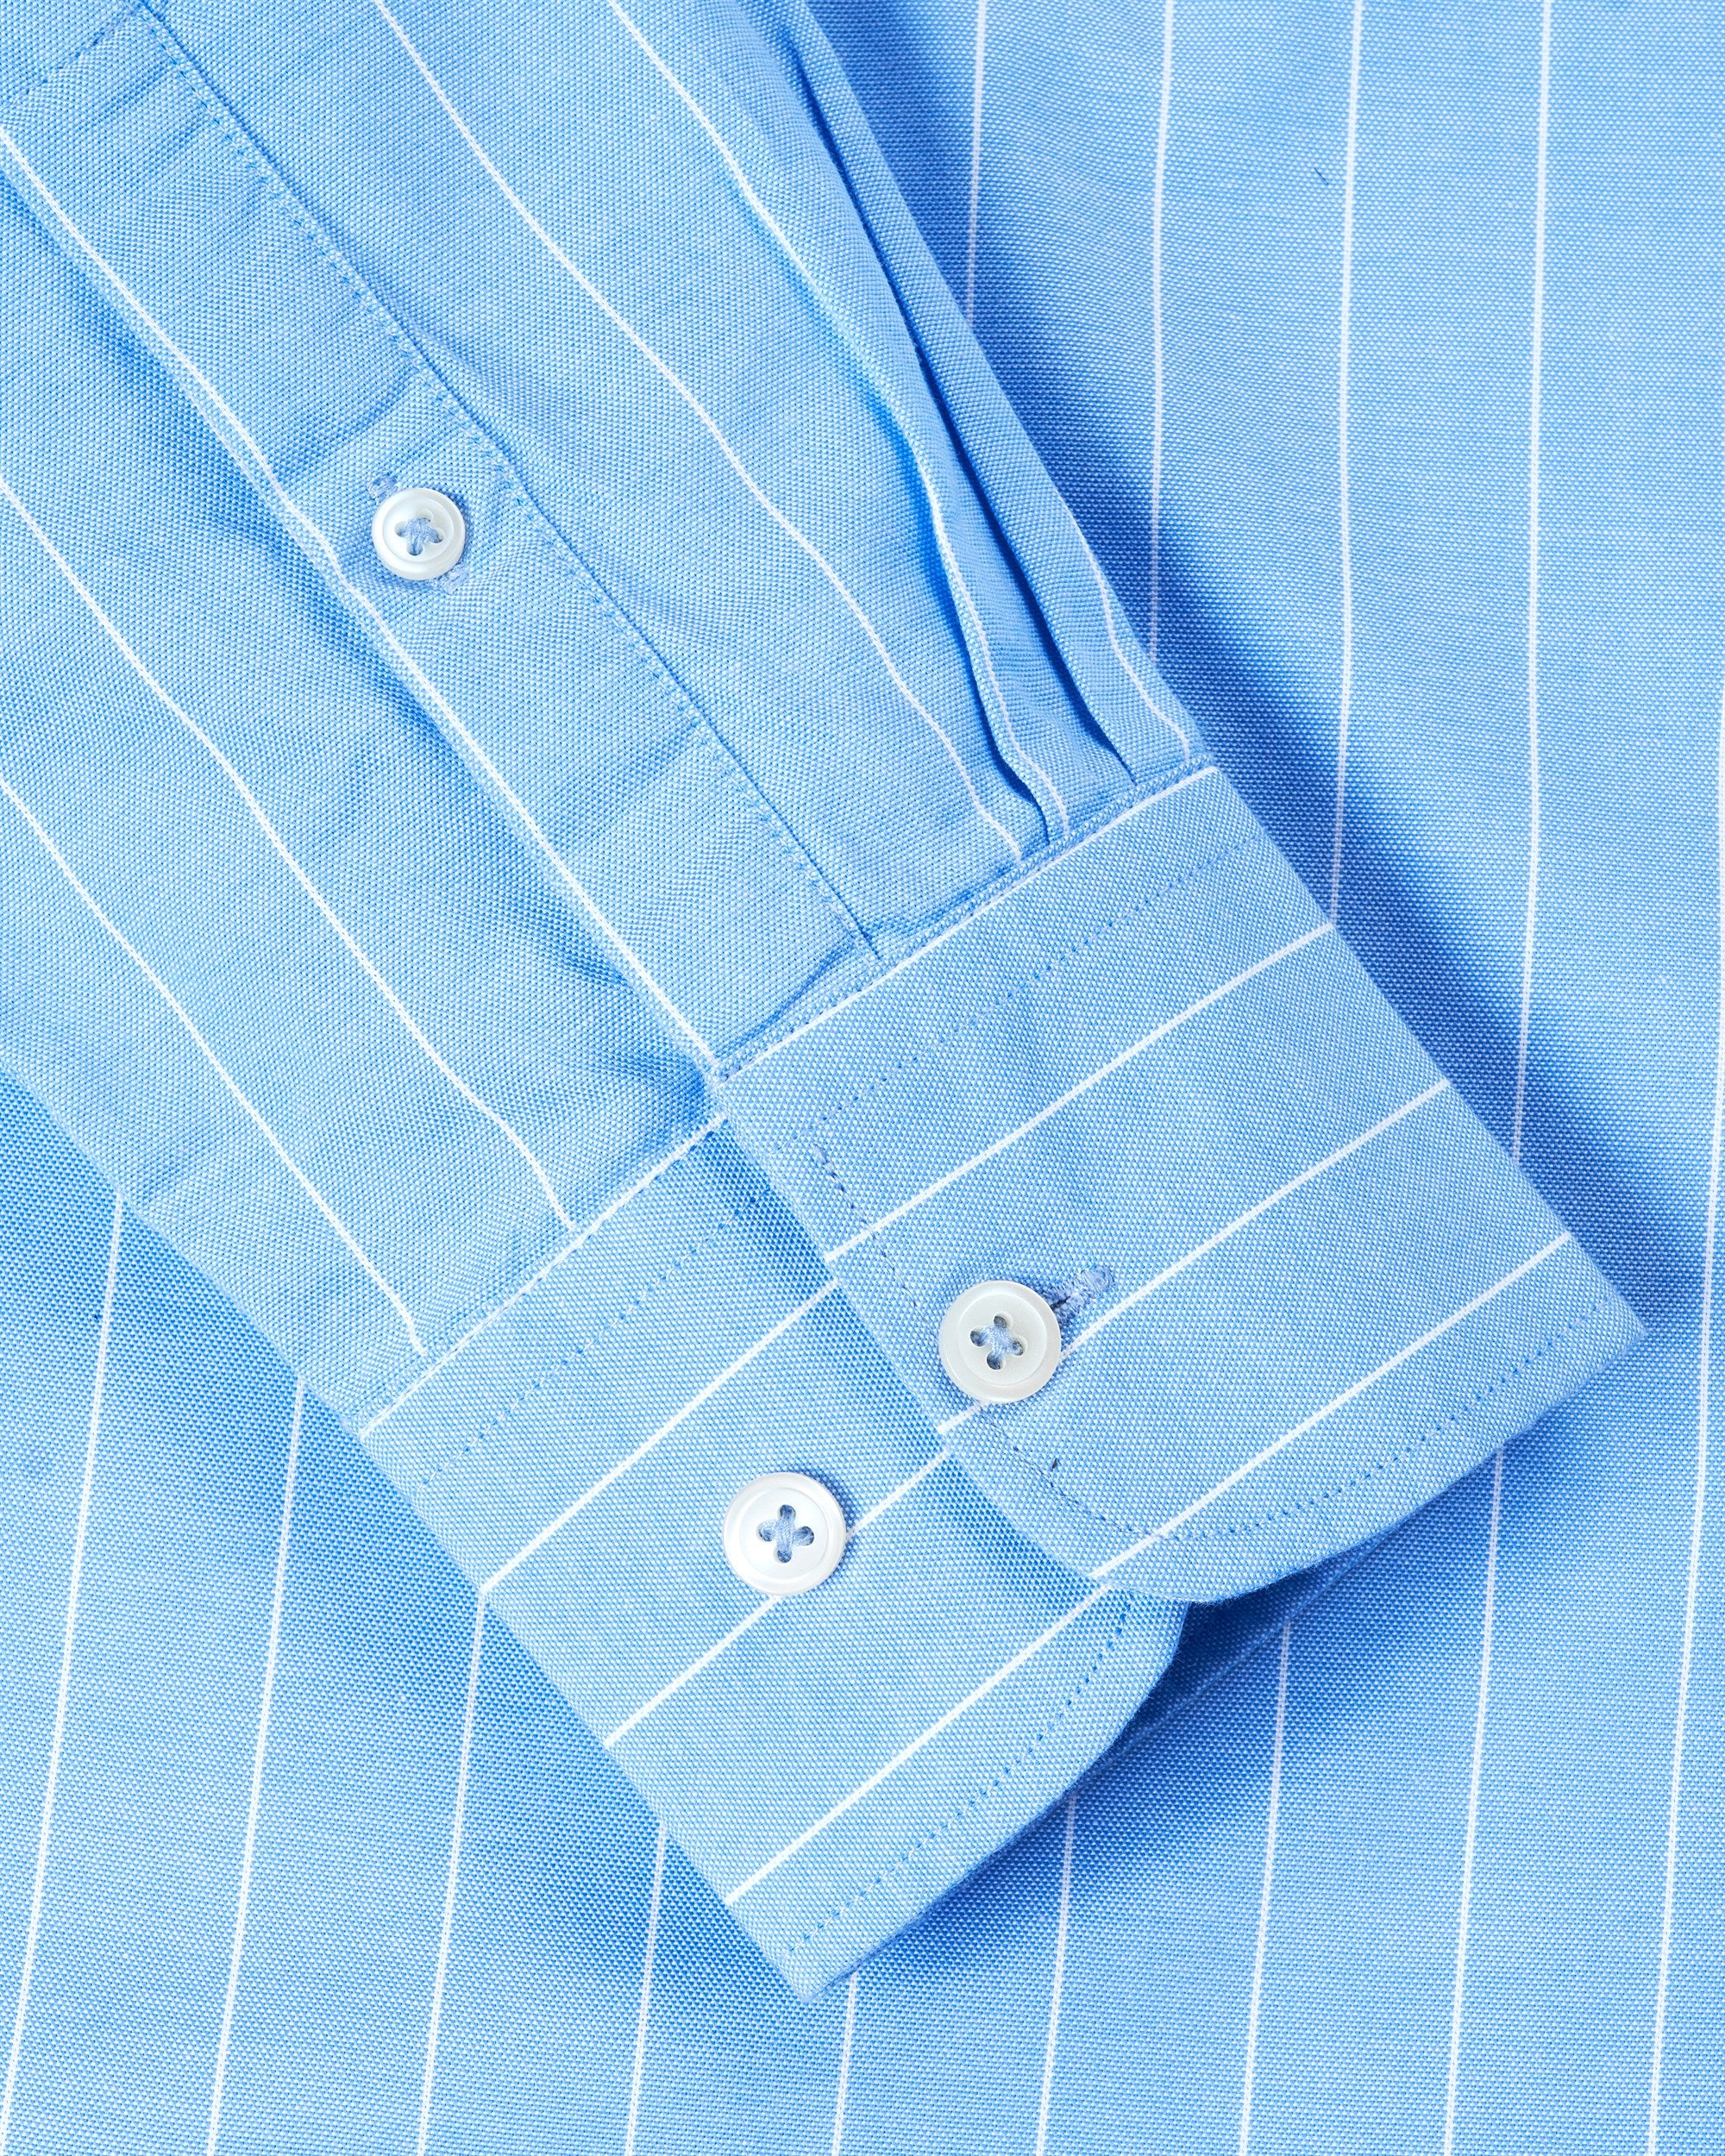 Bare Brown Mandarin Collar Cotton Pinstriped Shirt, Slim Fit with Full Sleeves - Light Blue